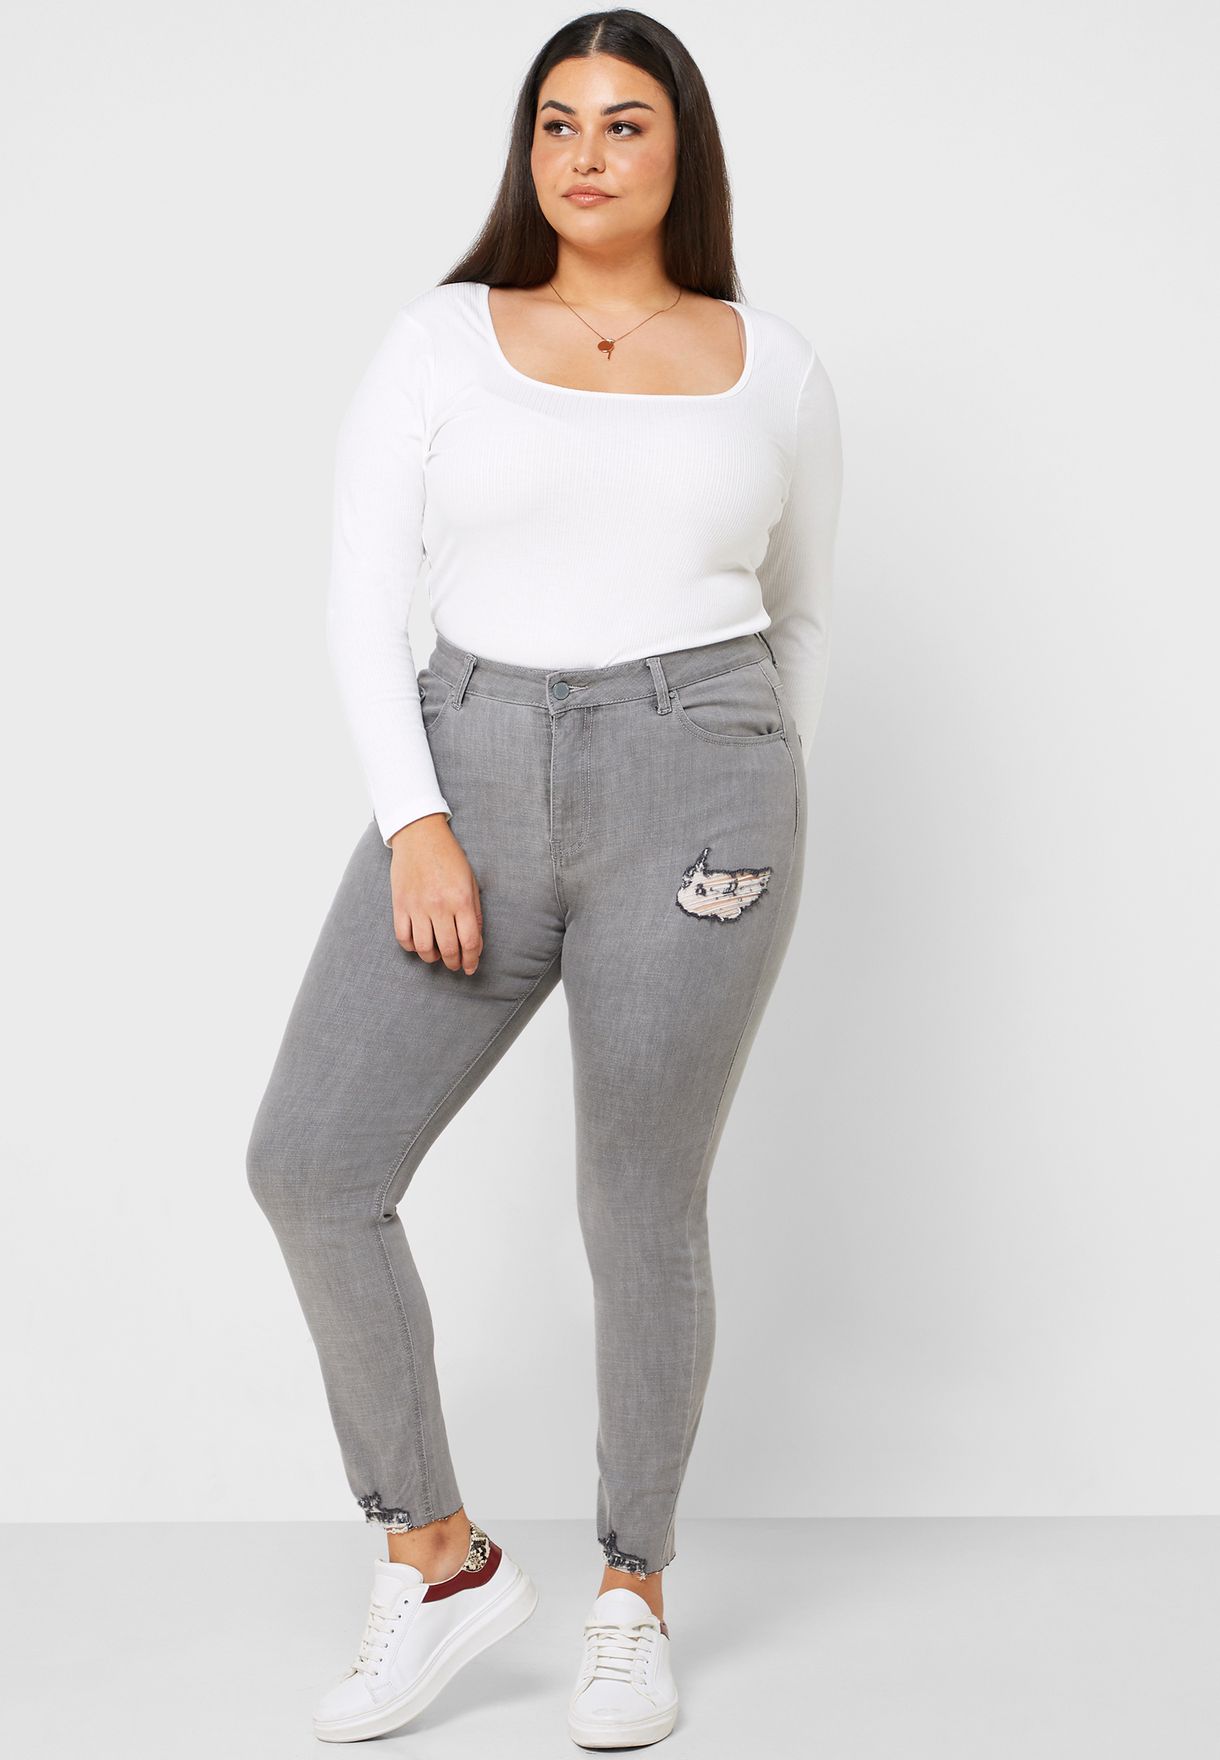 ripped skinny jeans womens grey